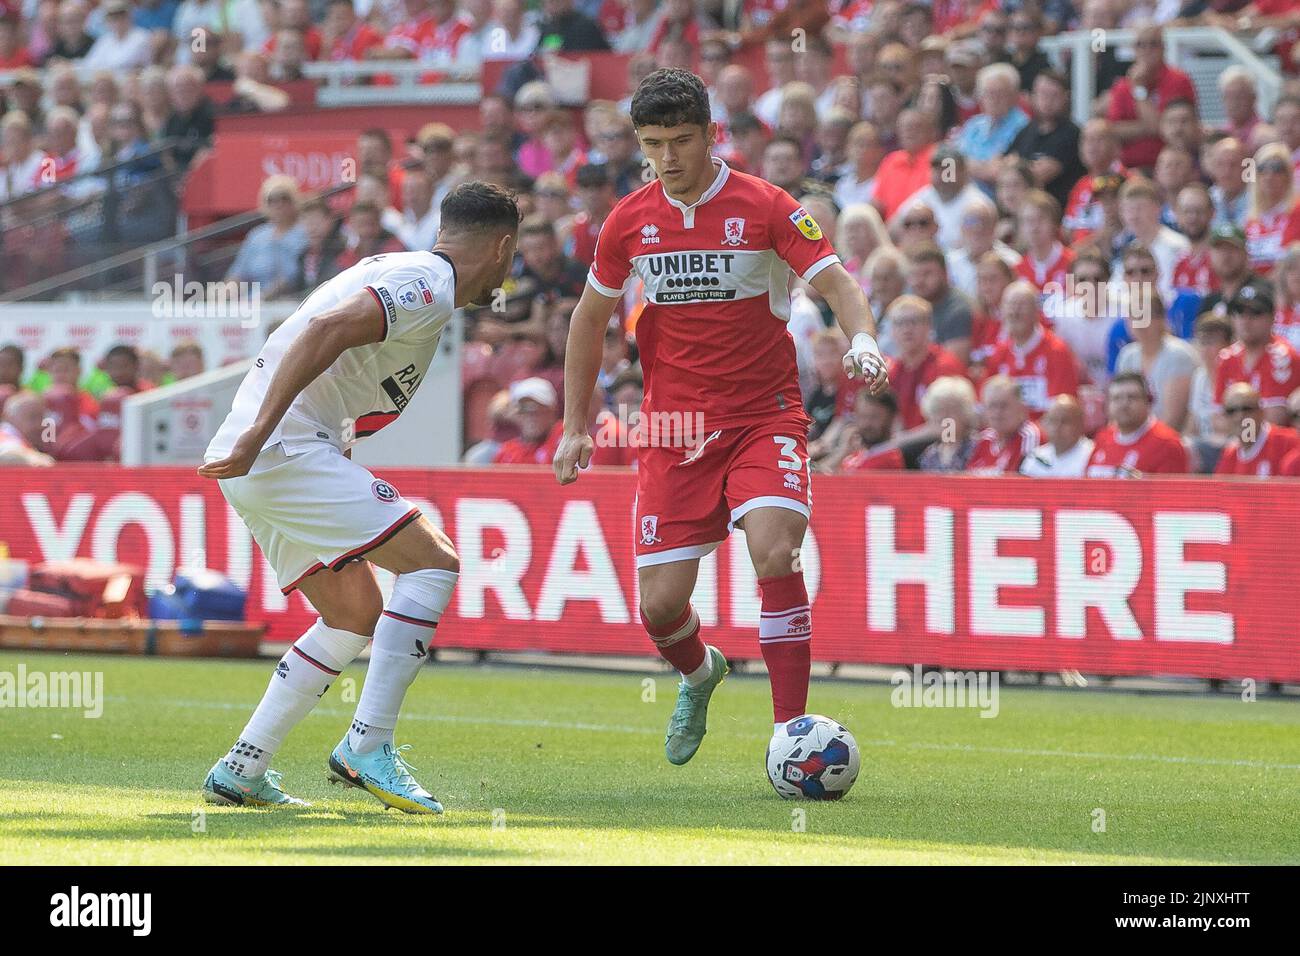 Ryan Giles #3 of Middlesbrough on the ball during the first half  in Middlesbrough, United Kingdom on 8/14/2022. (Photo by James Heaton/News Images/Sipa USA) Stock Photo